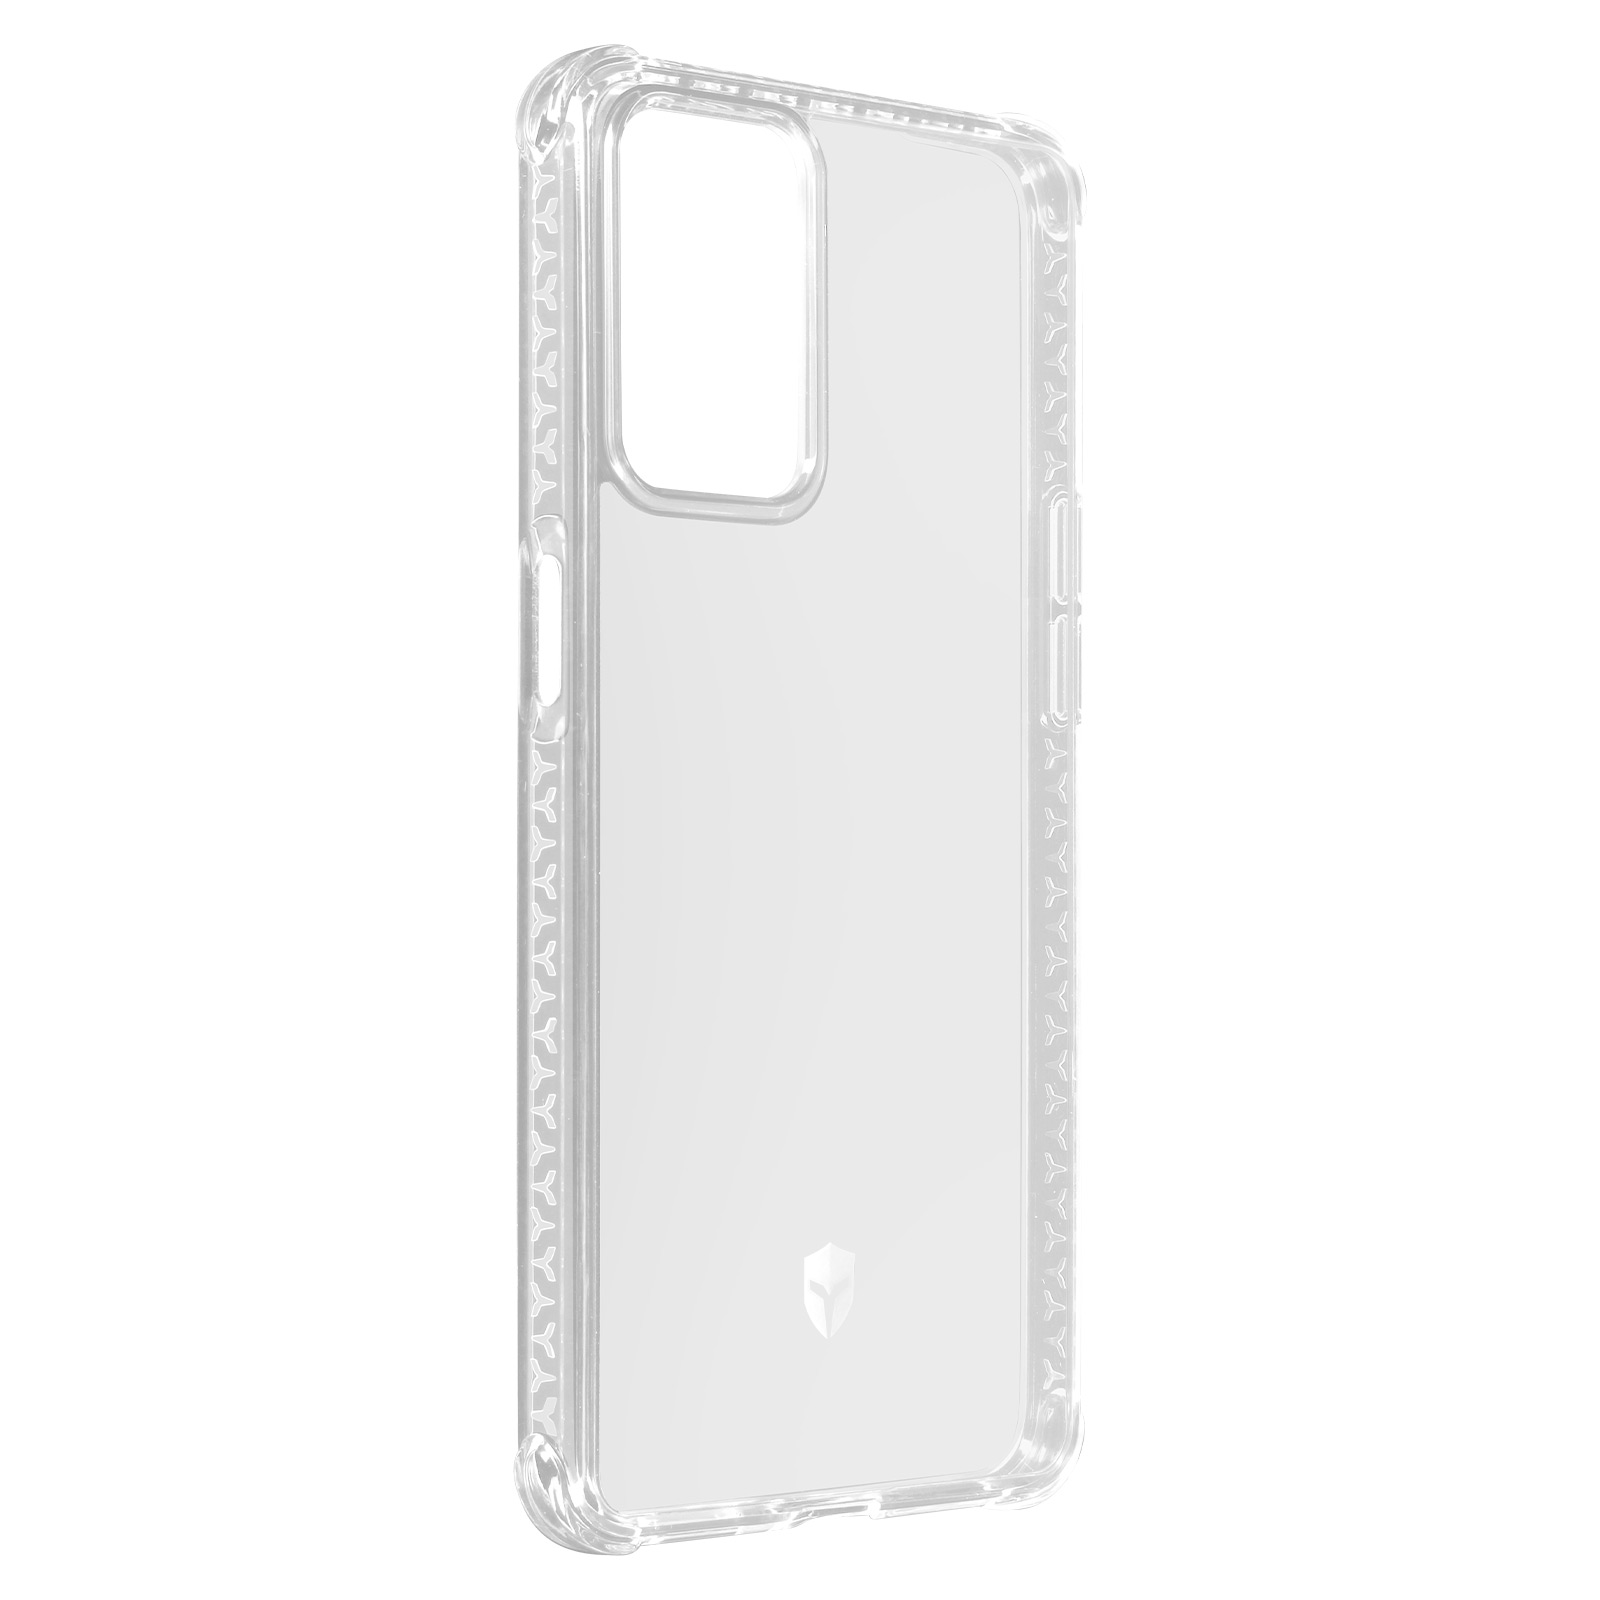 Transparent Air 5G, Oppo, BIGBEN 6 Series, Reno Backcover,